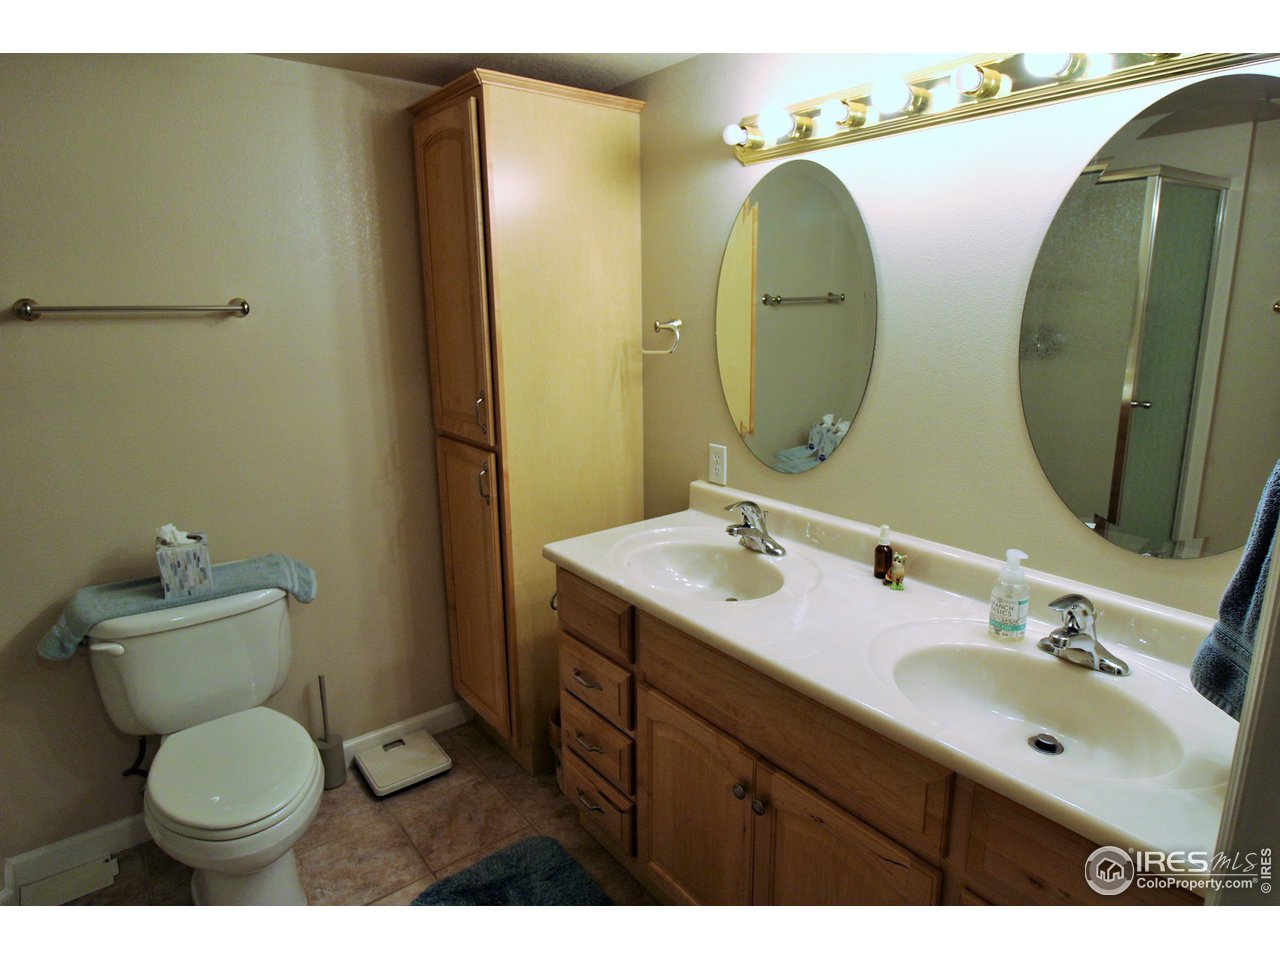 3/4 basement bath includes a double vanity and linen cabinet.